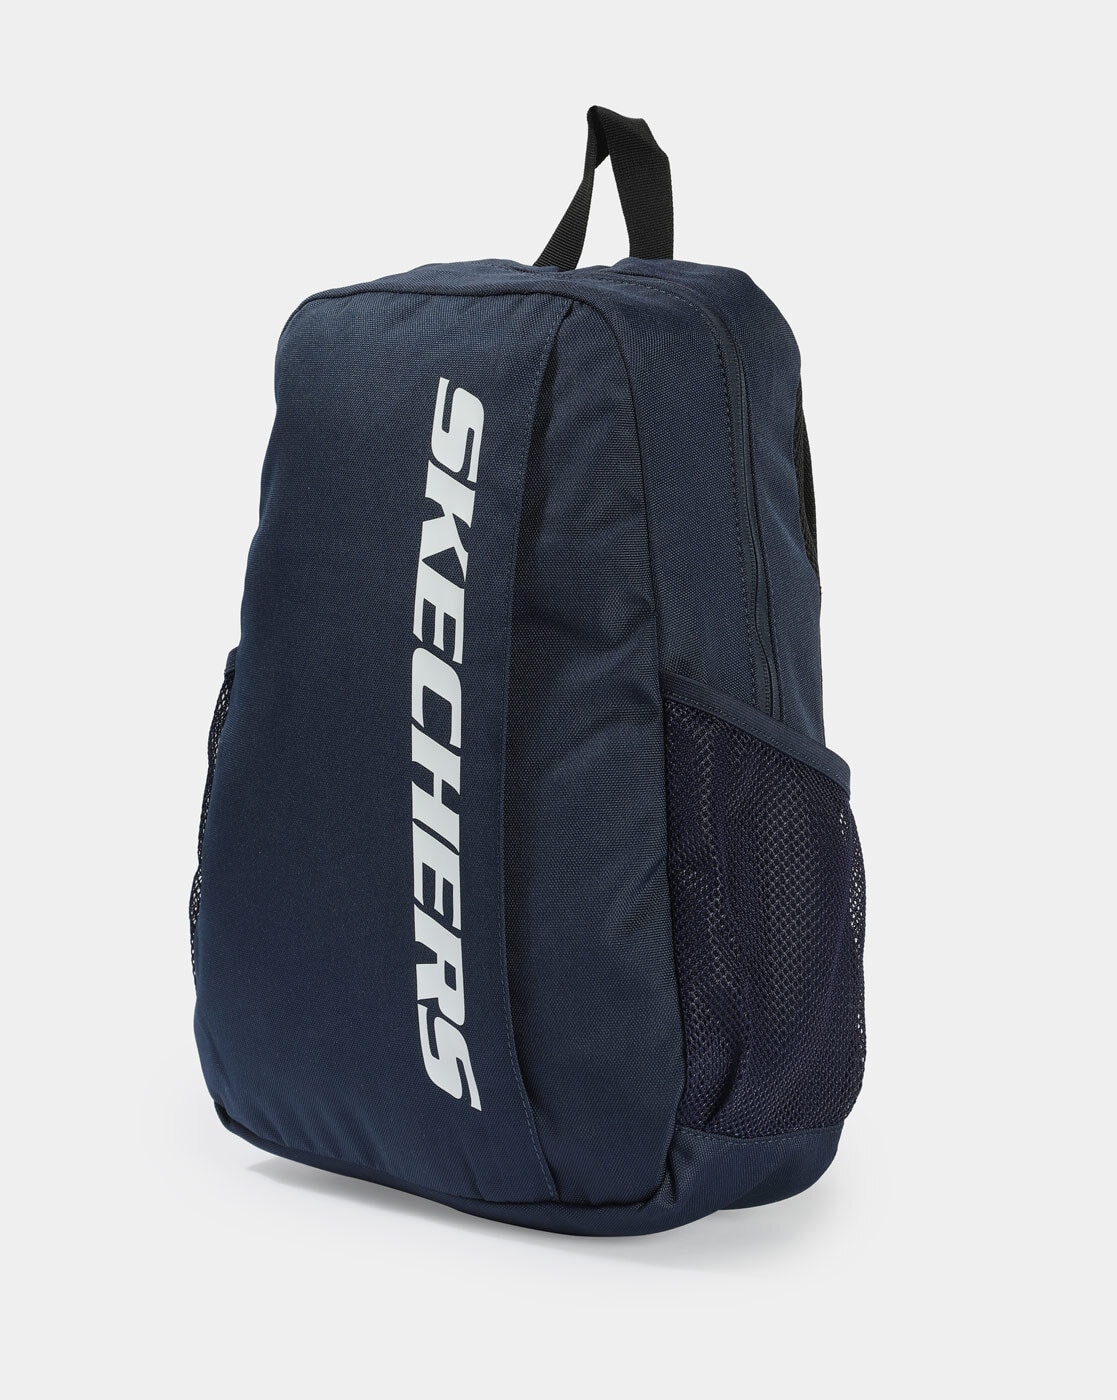 Centro Shoes - Get a Skechers laptop backpack worth Rs. 1,999 for an  attractive price of Rs. 499 on purchase of Rs. 3,999 and more #centro #sale  #offers #discounts #dufflebag #laptopbag #luggagebag #